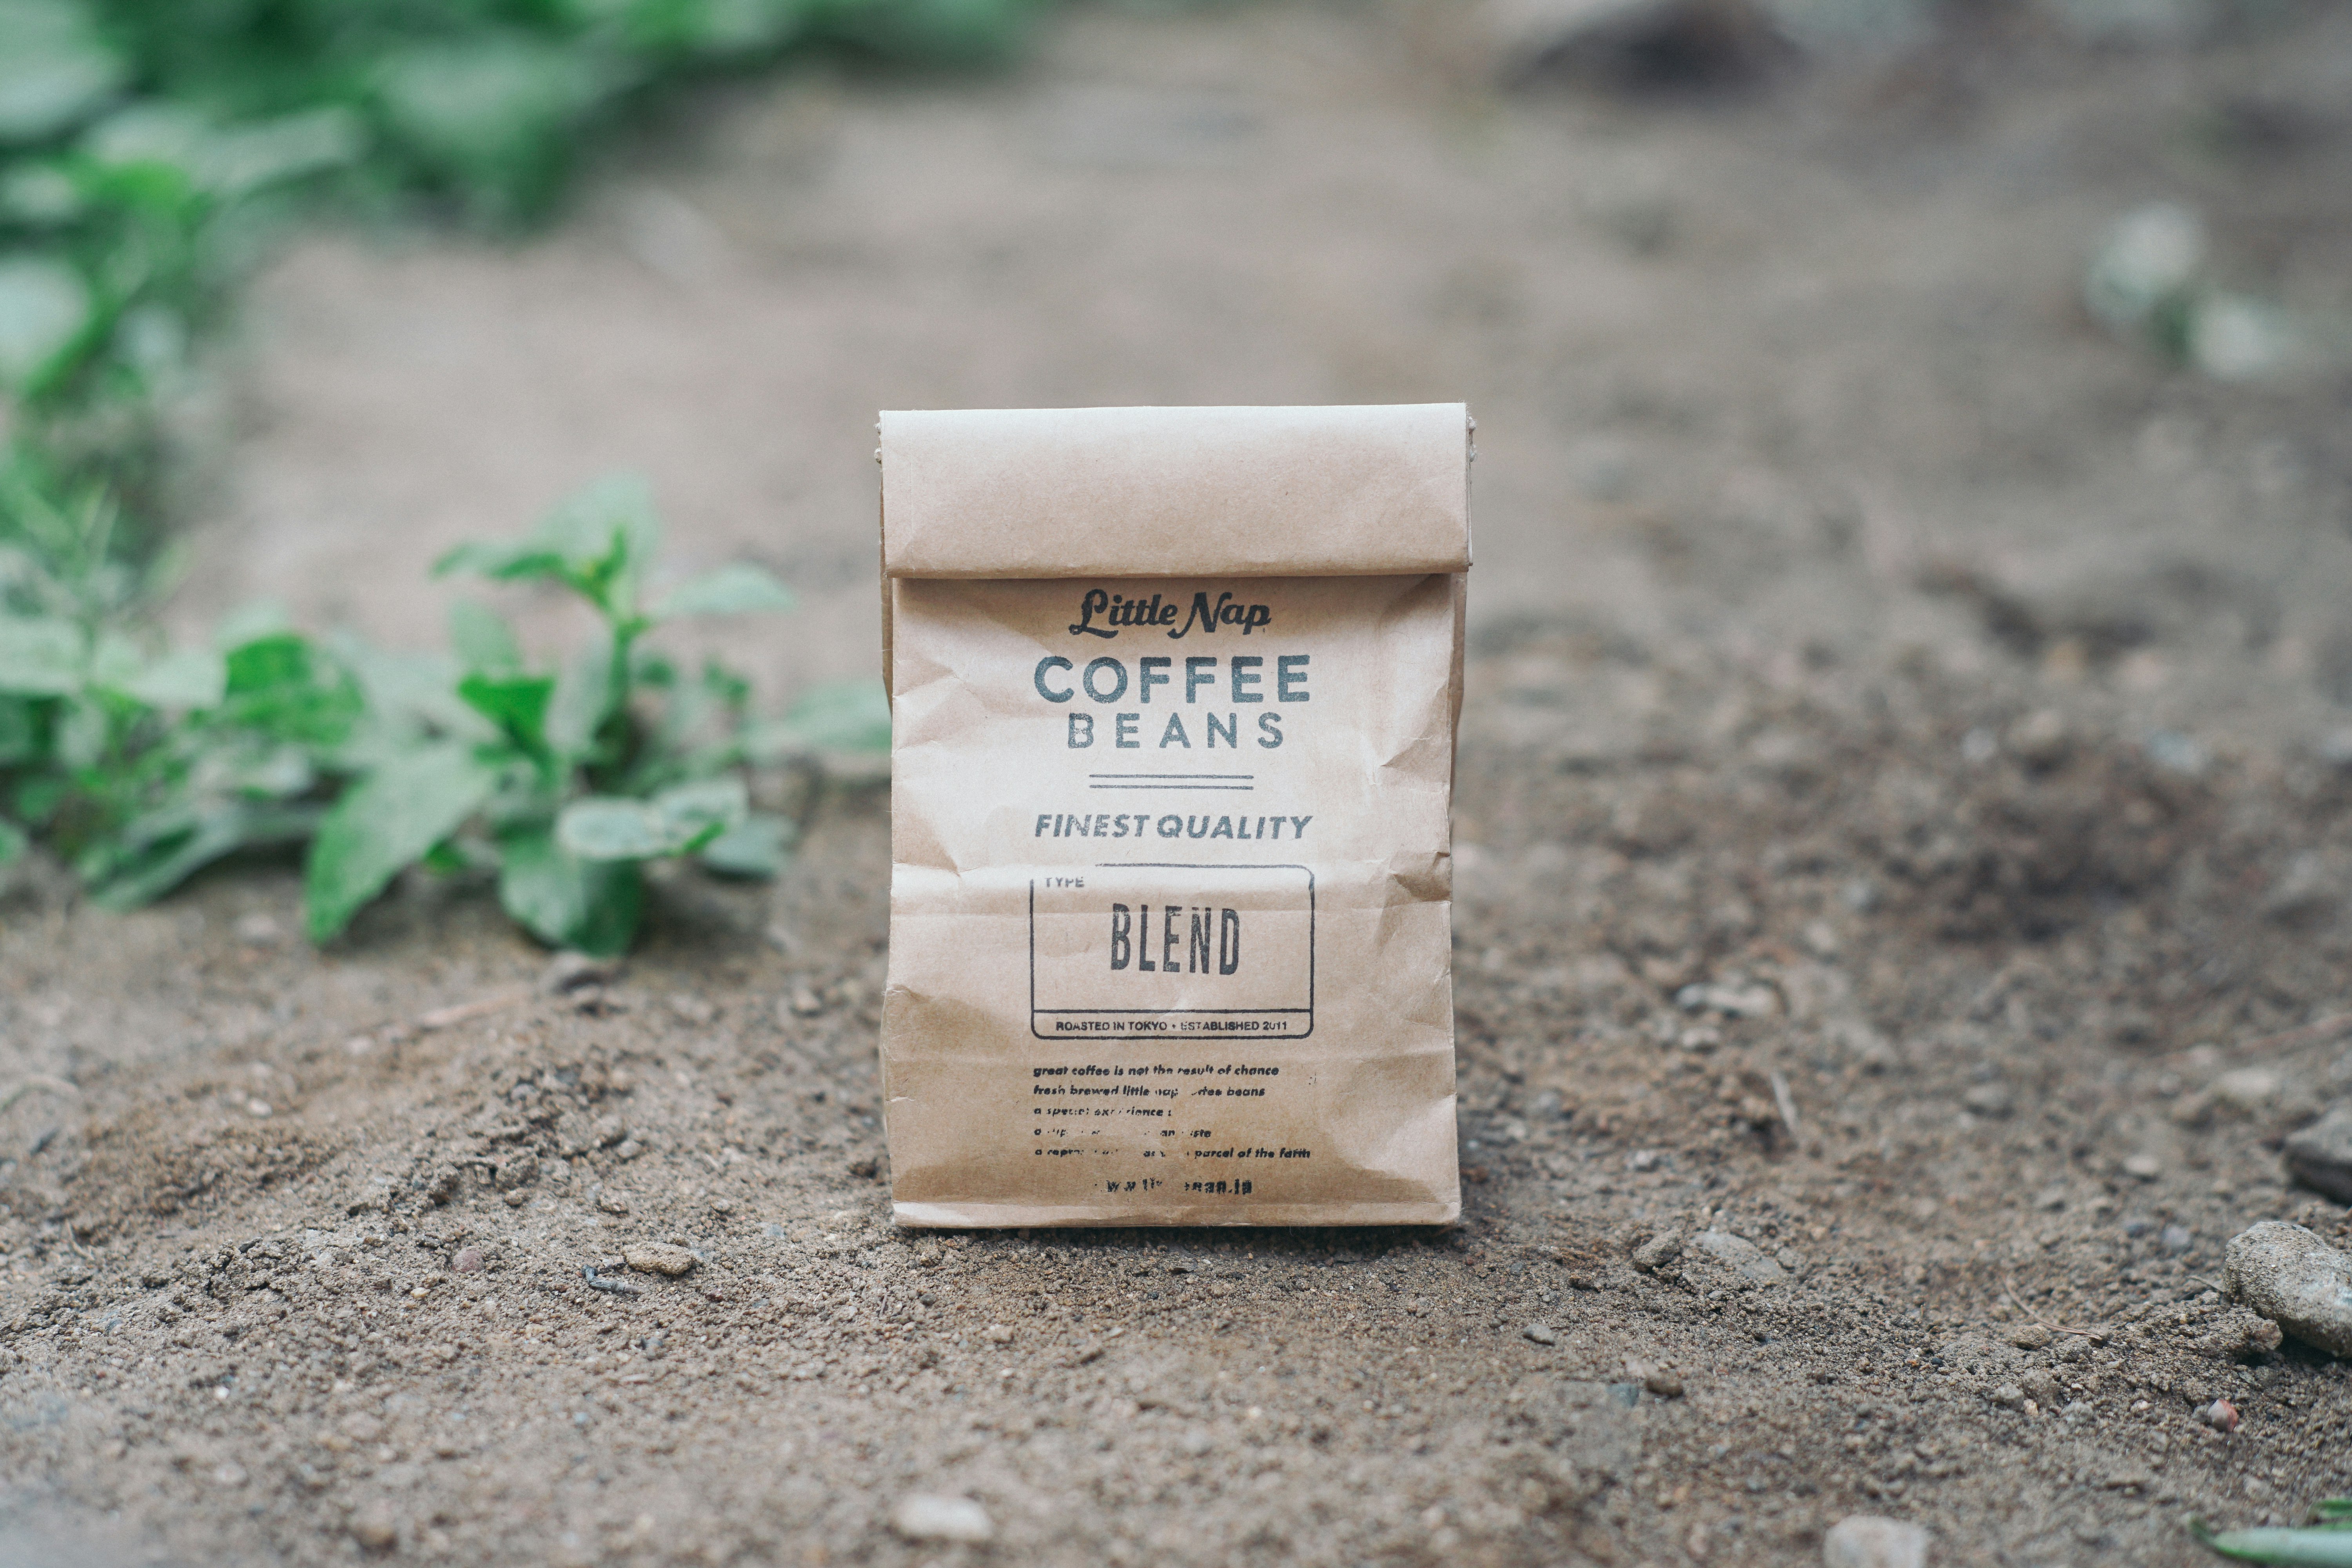 Coffee Beans blend paper bag on ground